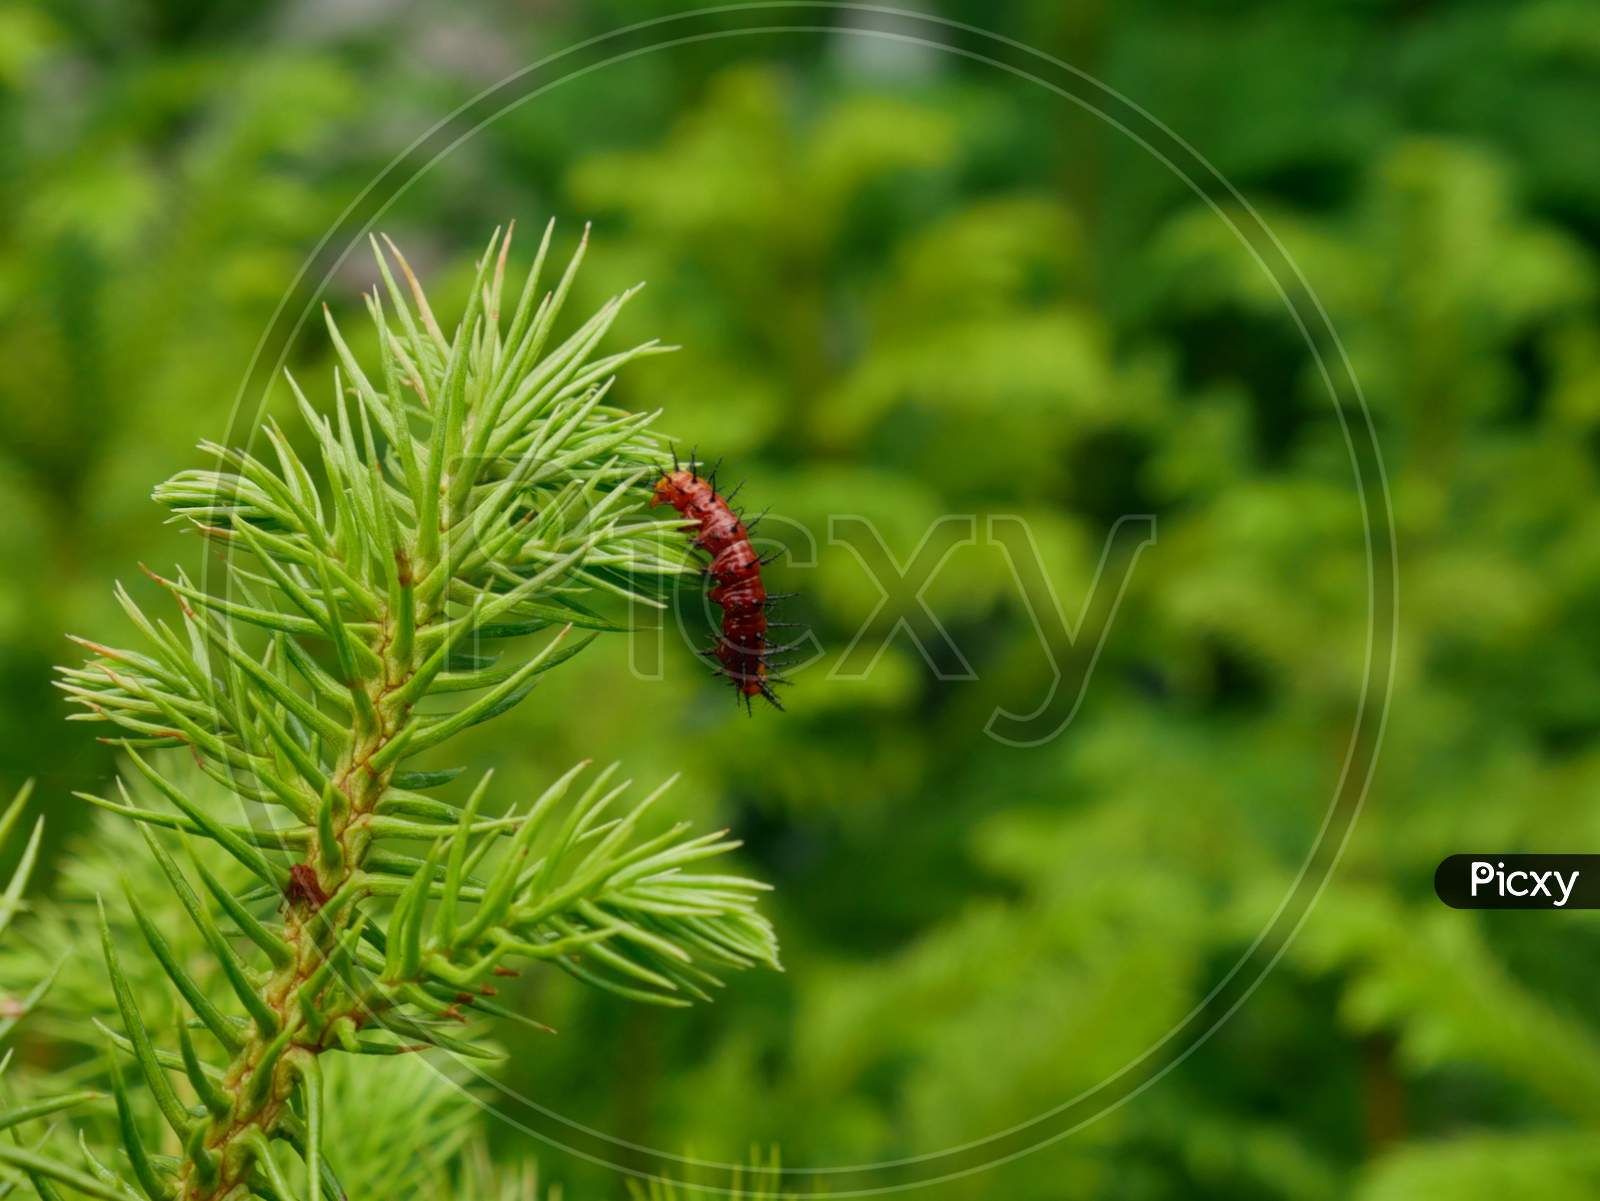 Plant Insect Hanging On Grass Nature Leaves On Blur Background.